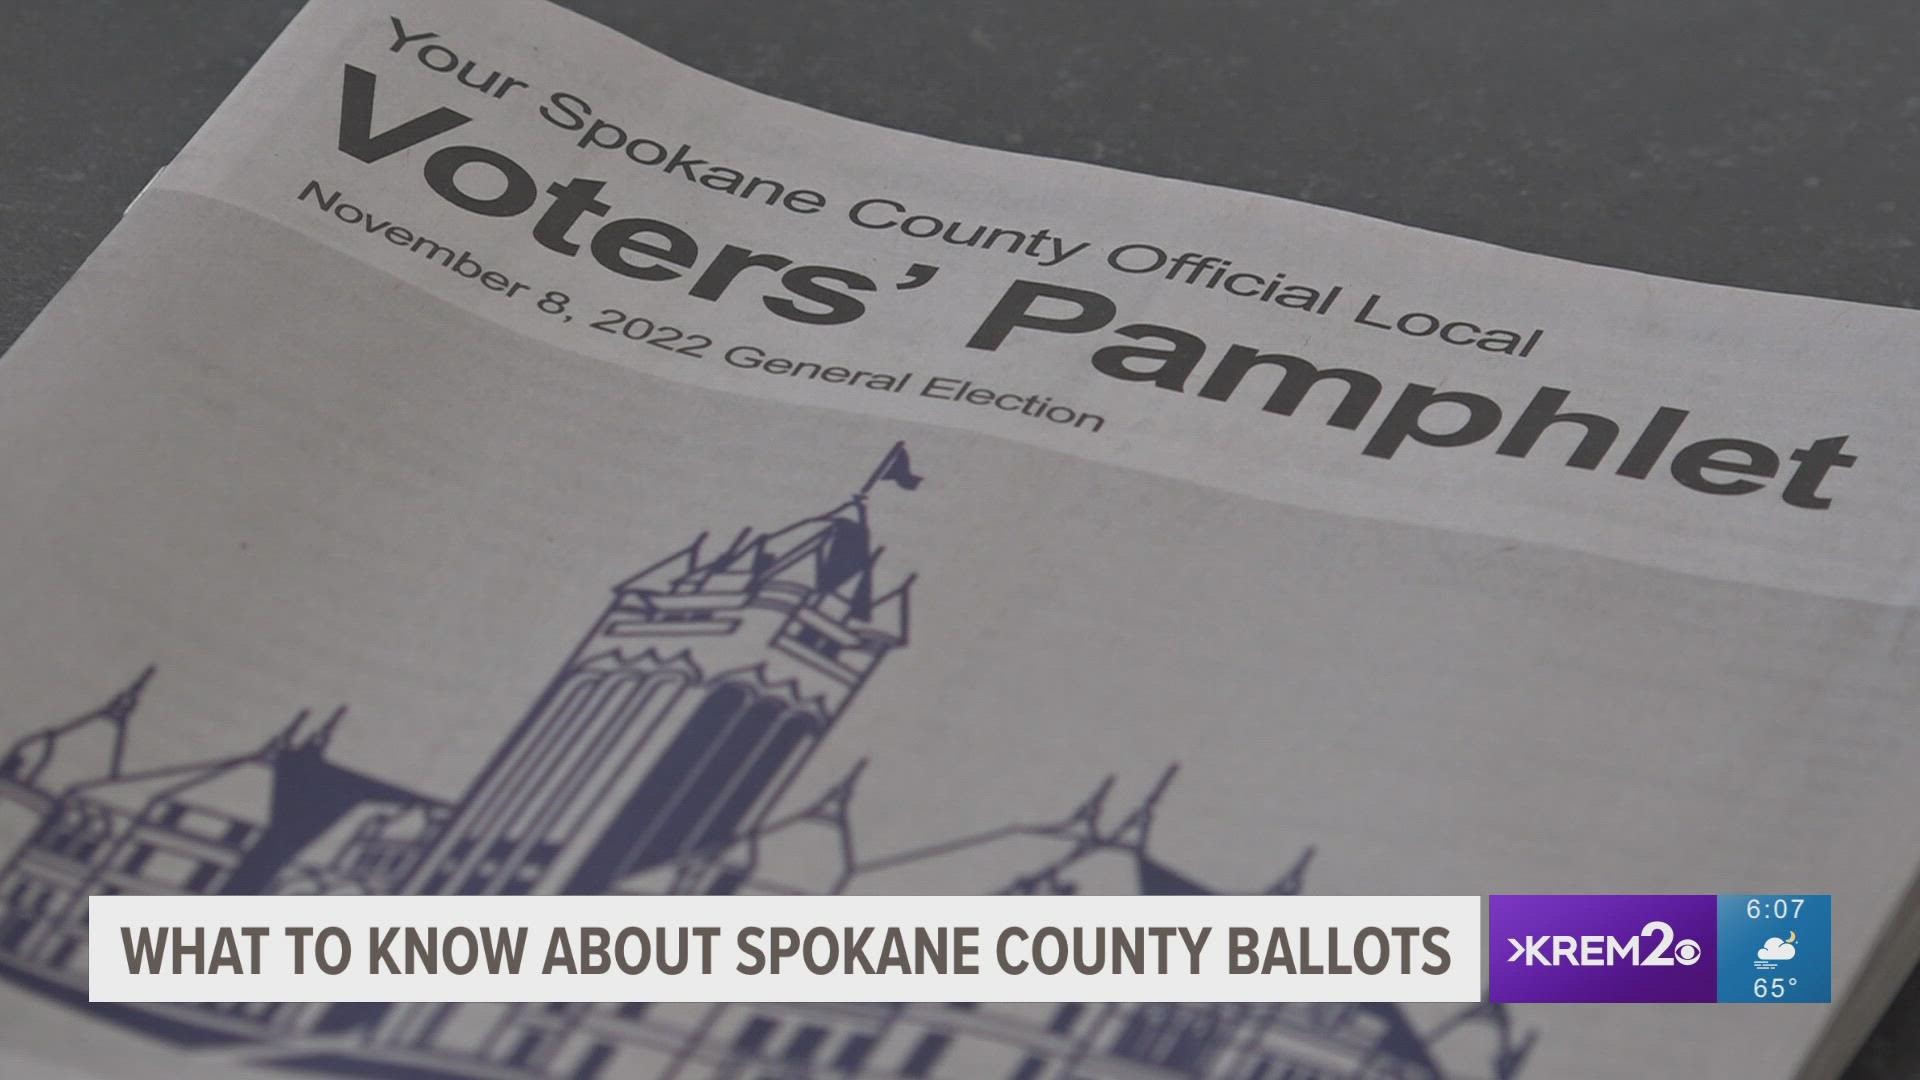 According to the Spokane County elections office, most registered voters should receive their general election ballots by Oct. 21.